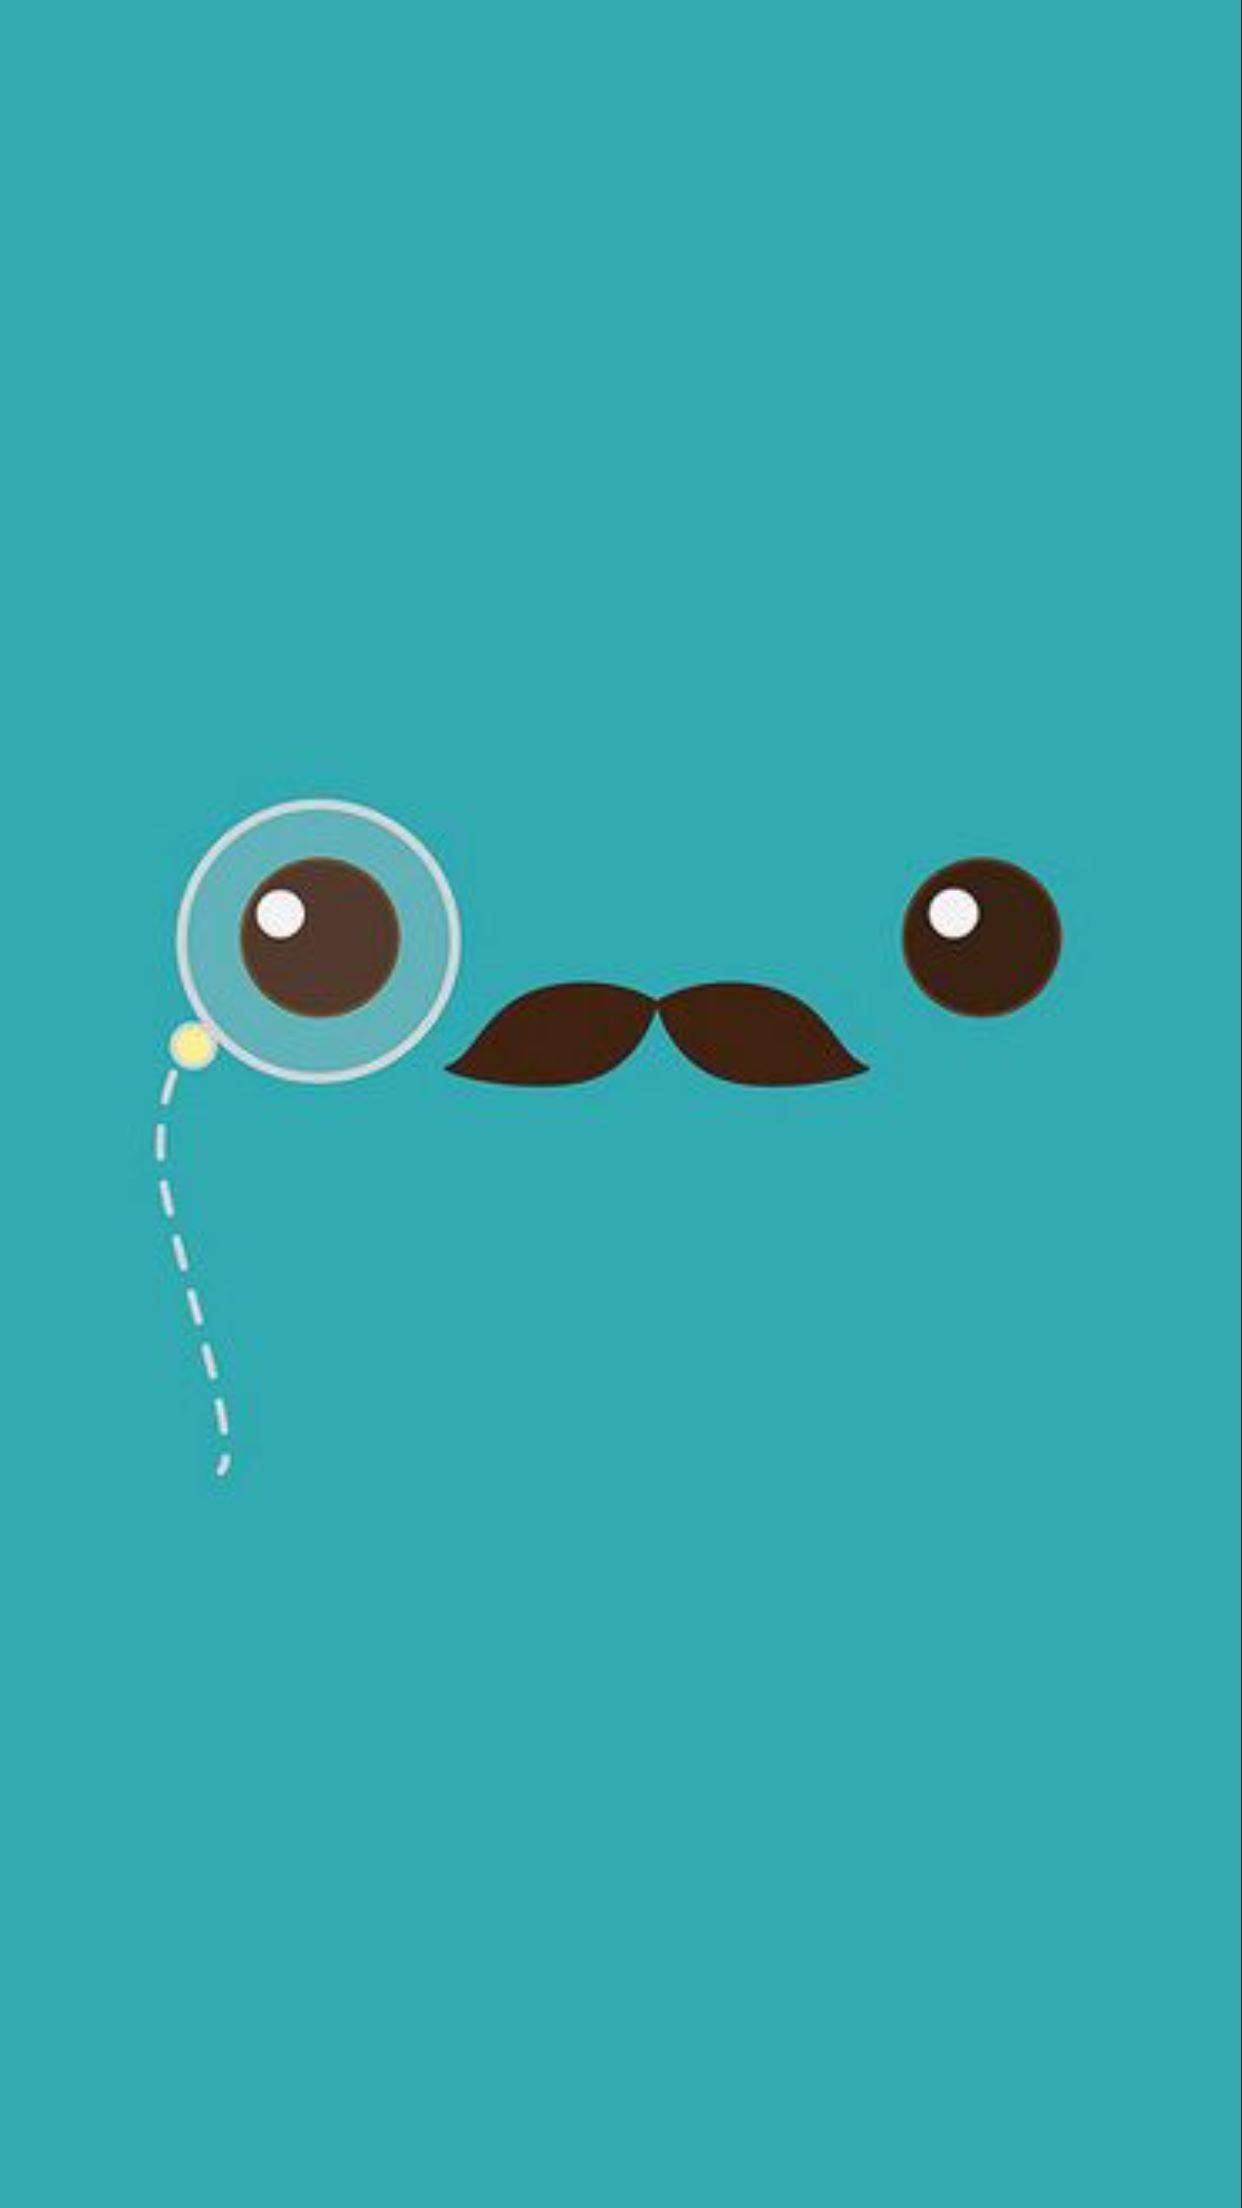 iPhone11papers.com | iPhone11 wallpaper |  ve72-hipster-moustache-cute-patterns